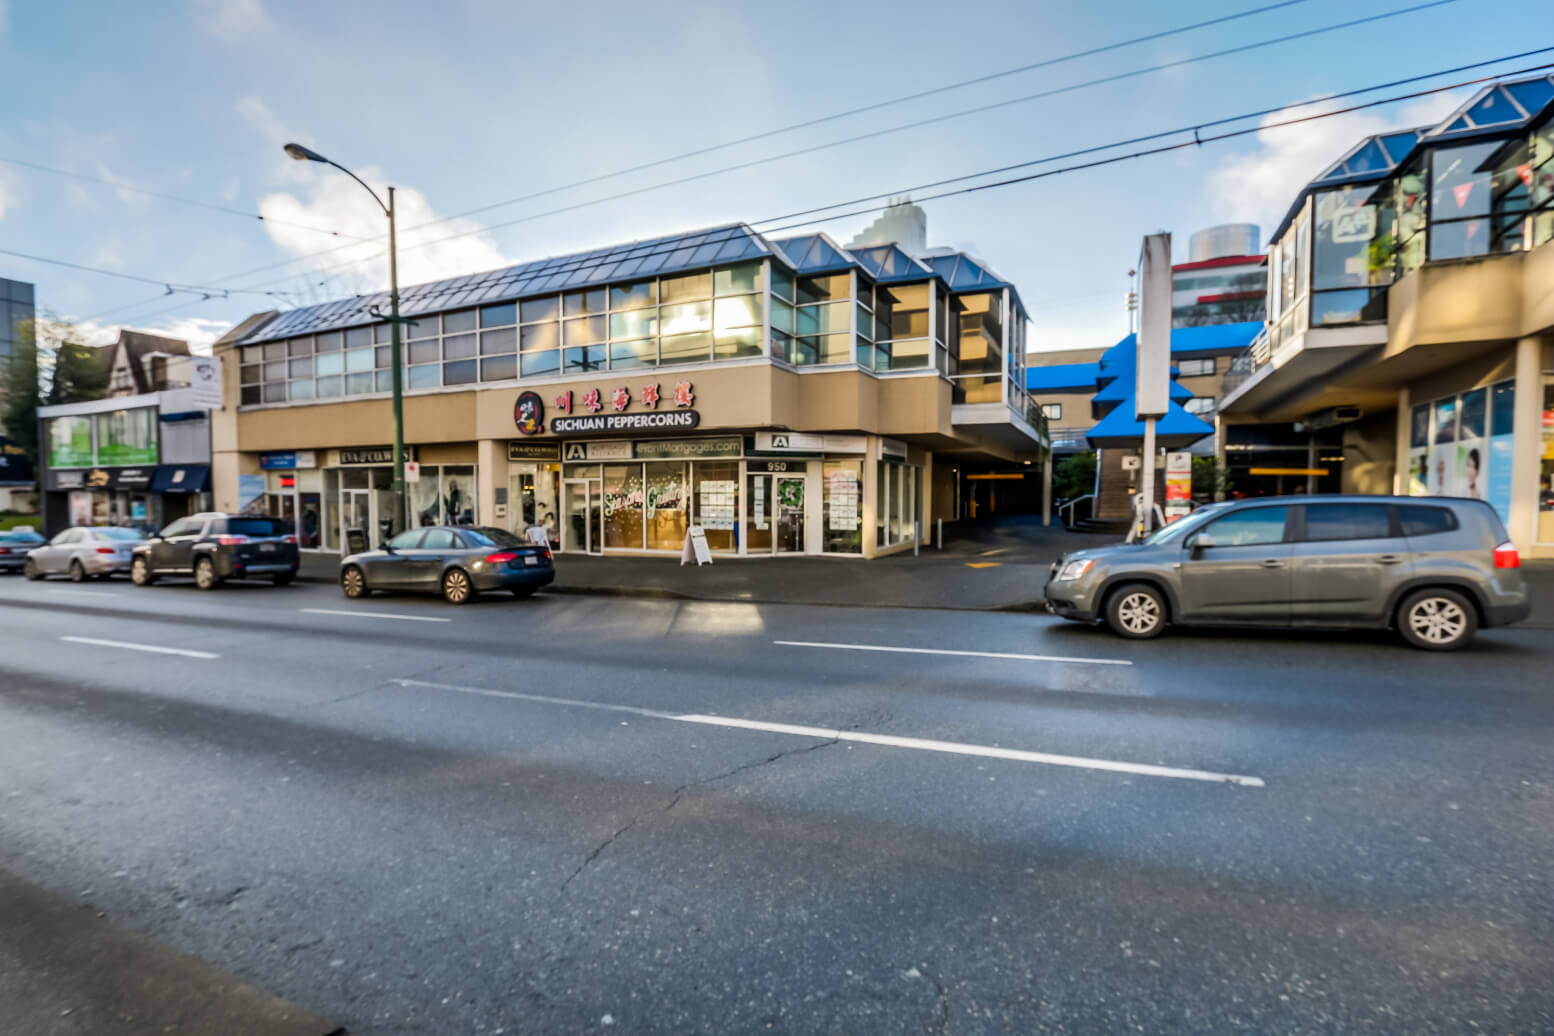 950 West Broadway Retail and Office Development site sold in Vancouver facade picture